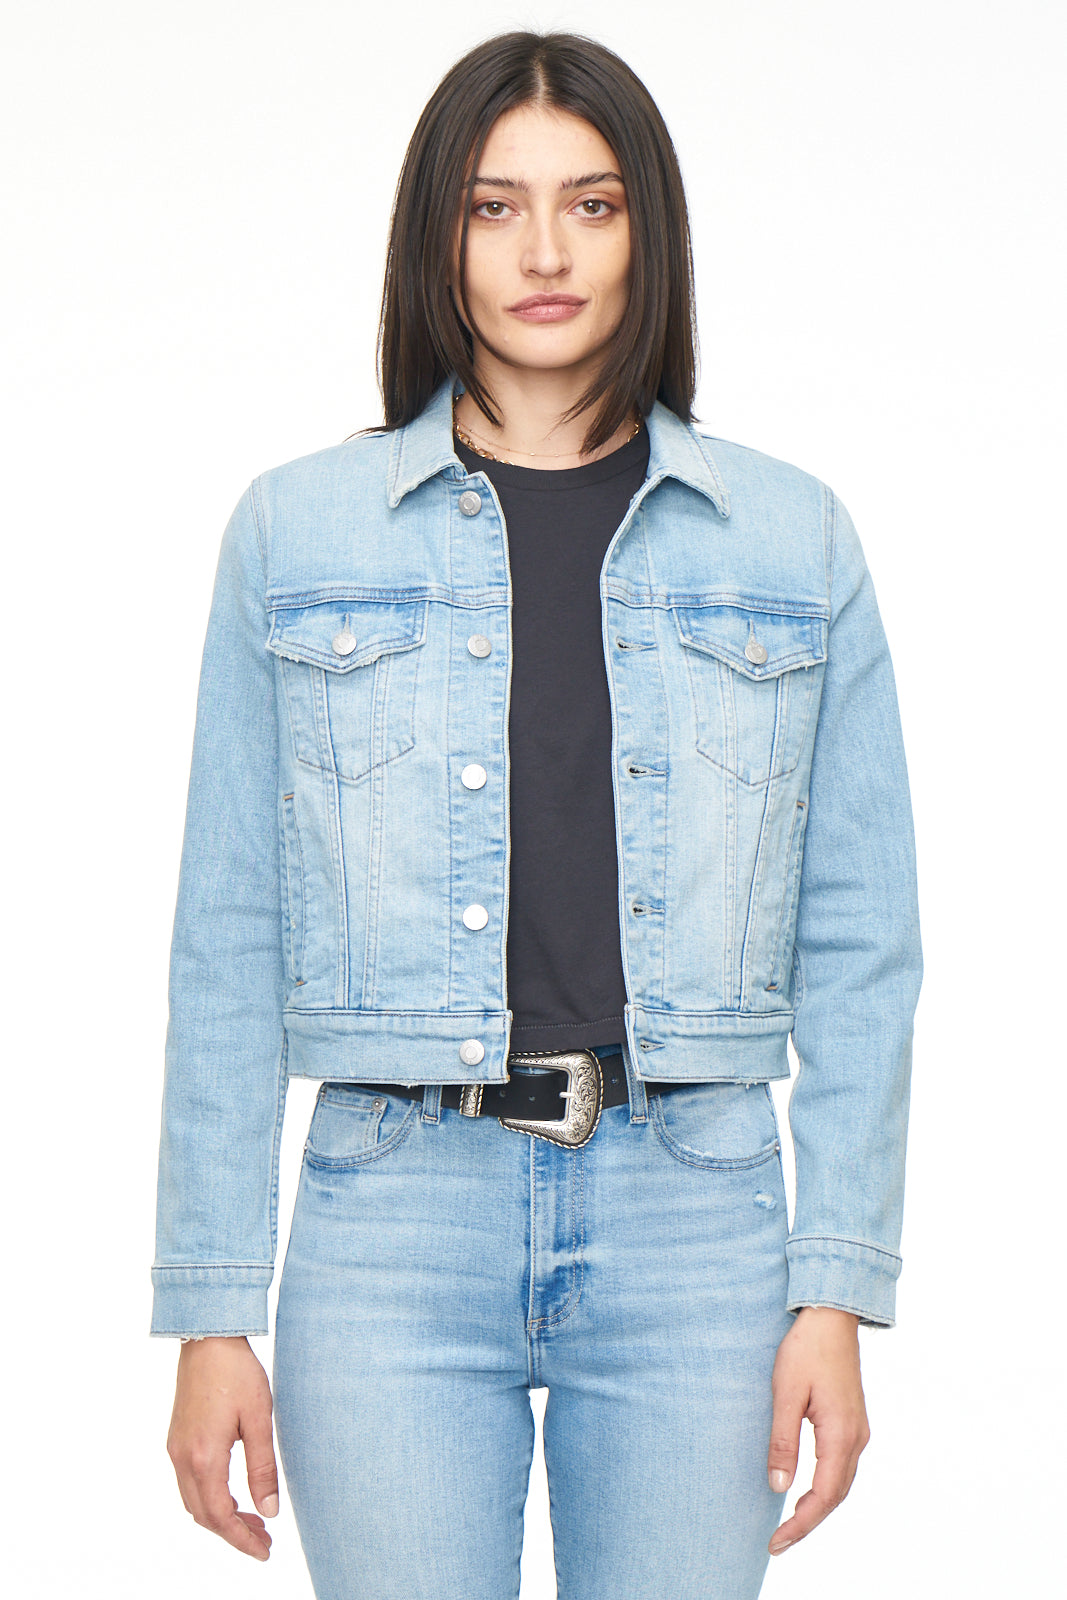 Fiorucci Jacket Enlarged Angel Denim Jacket | Urban Outfitters Singapore -  Clothing, Music, Home & Accessories